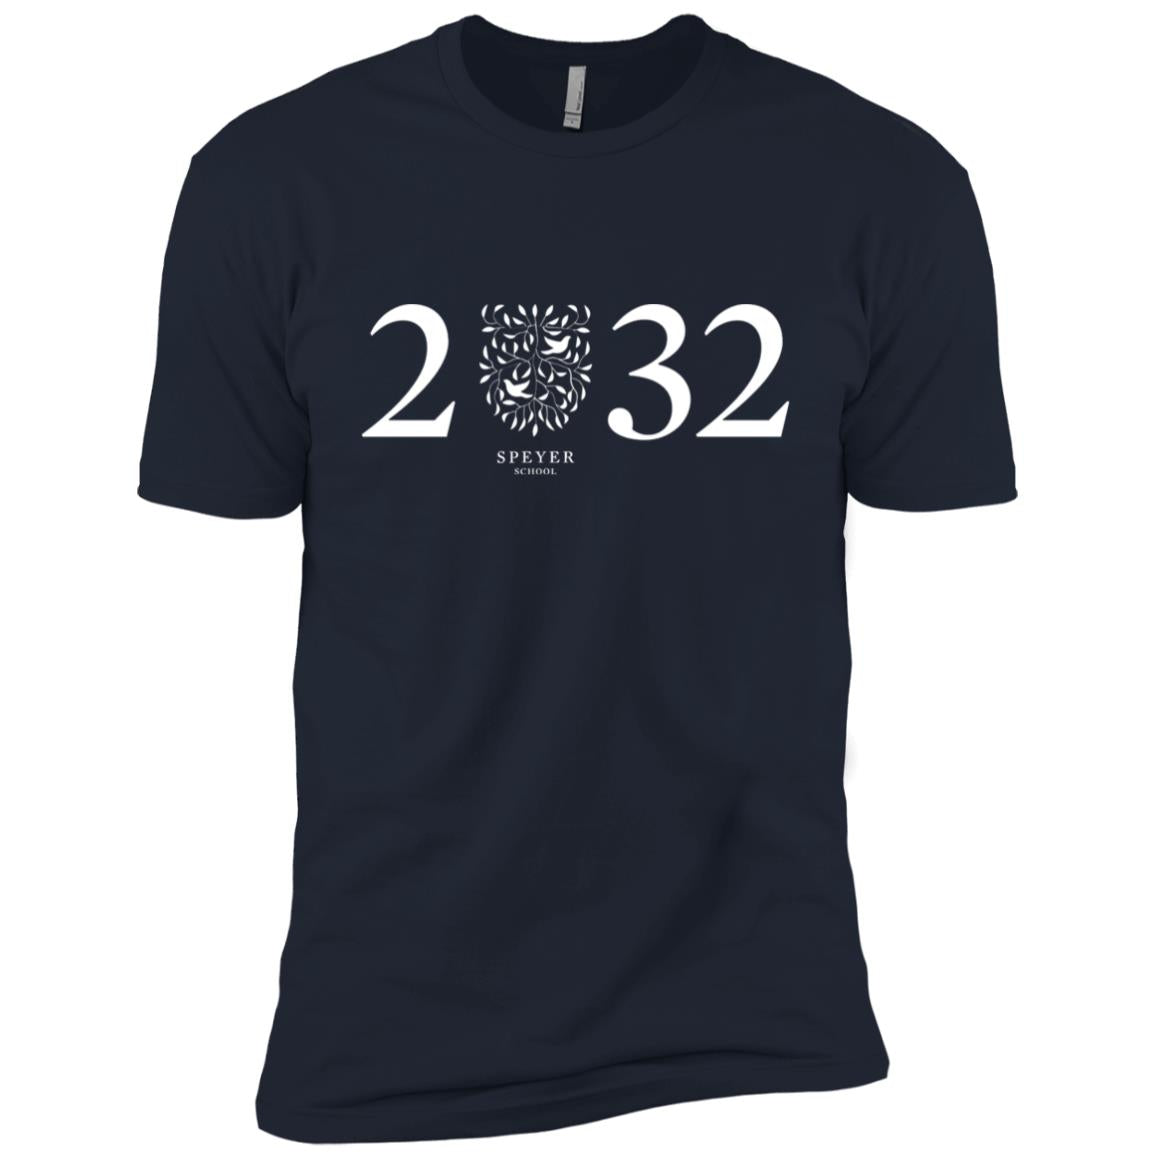 Class of 2032 T-Shirt, Youth Sizes